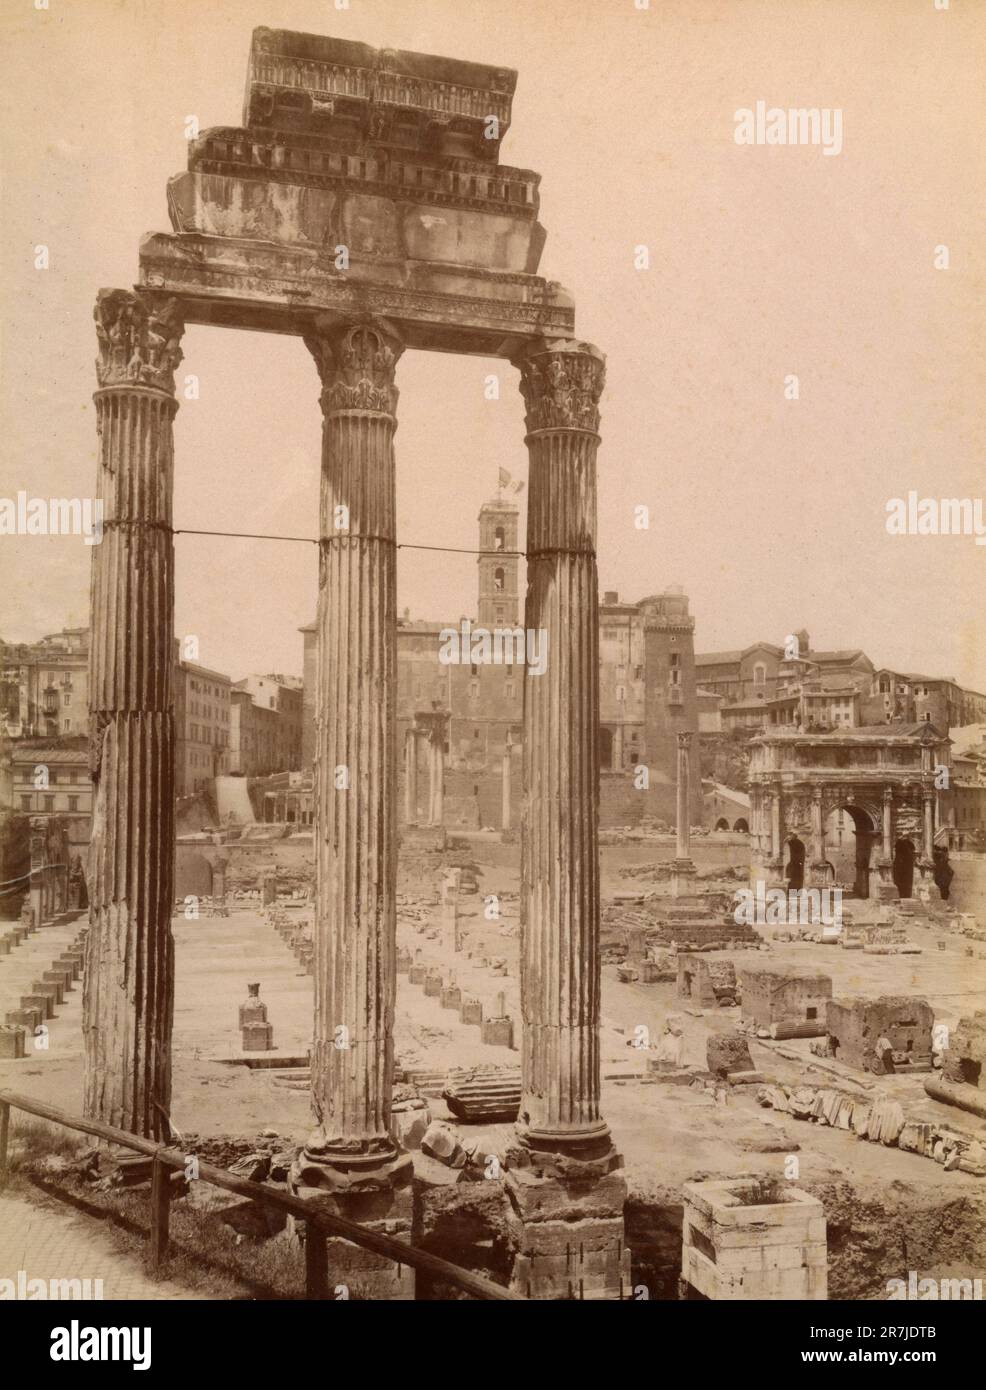 View of the rests of the Temple of Castor and Pollux at the Roman Forum, Rome, Italy 1880s Stock Photo